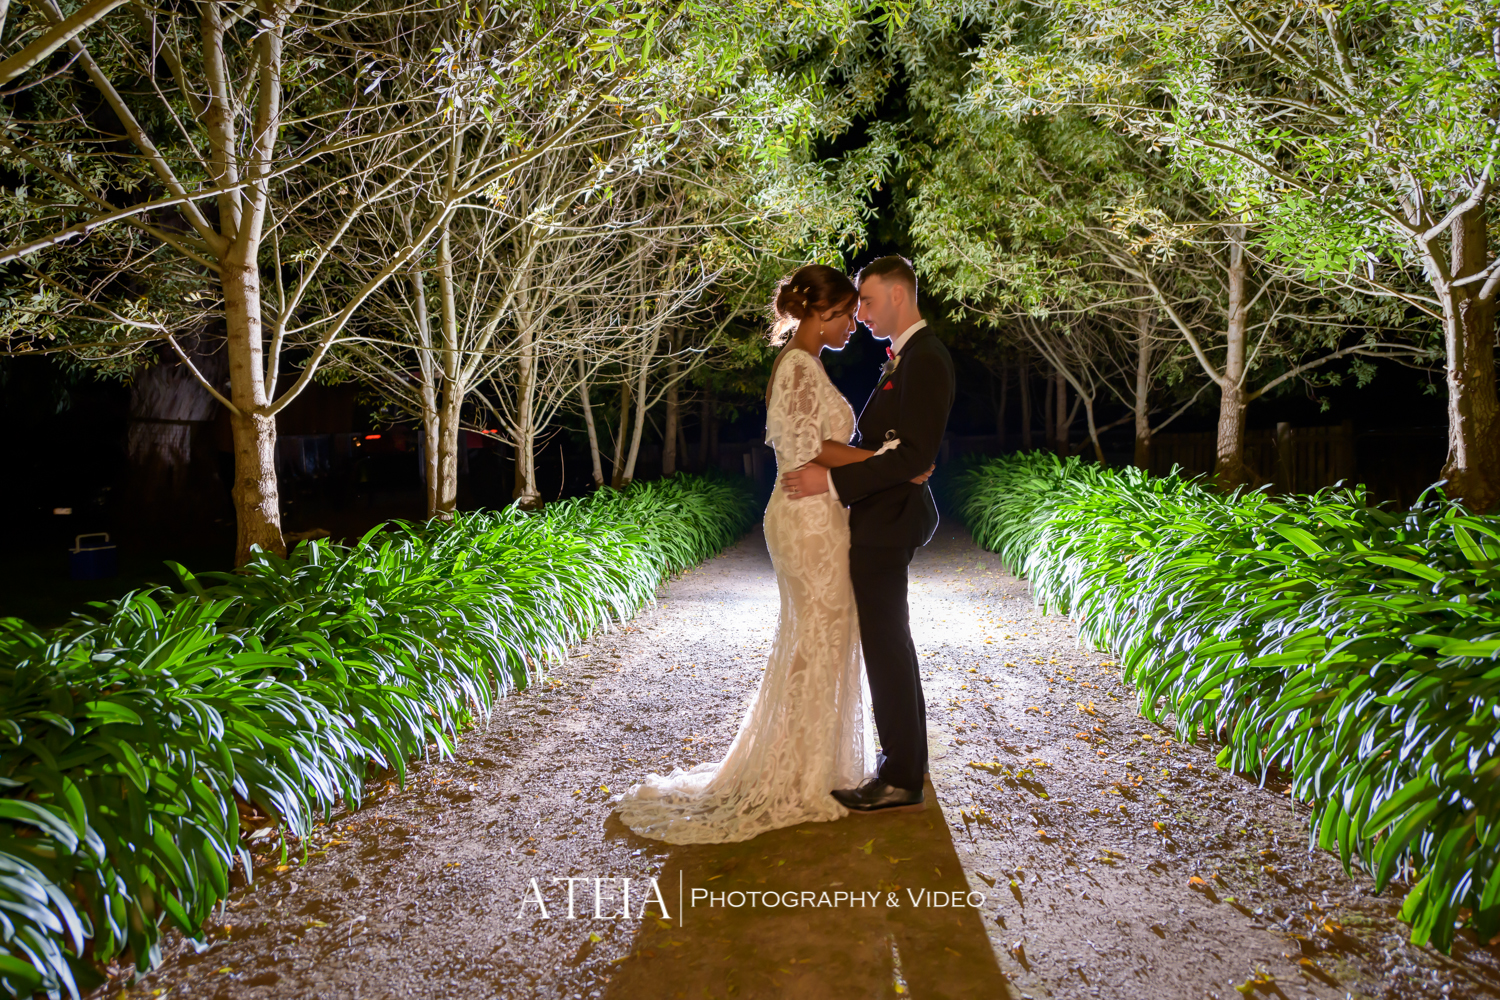 , Marianne and Kelvin&#8217;s wedding photography at Donigans Farm captured by ATEIA Photography &#038; Video